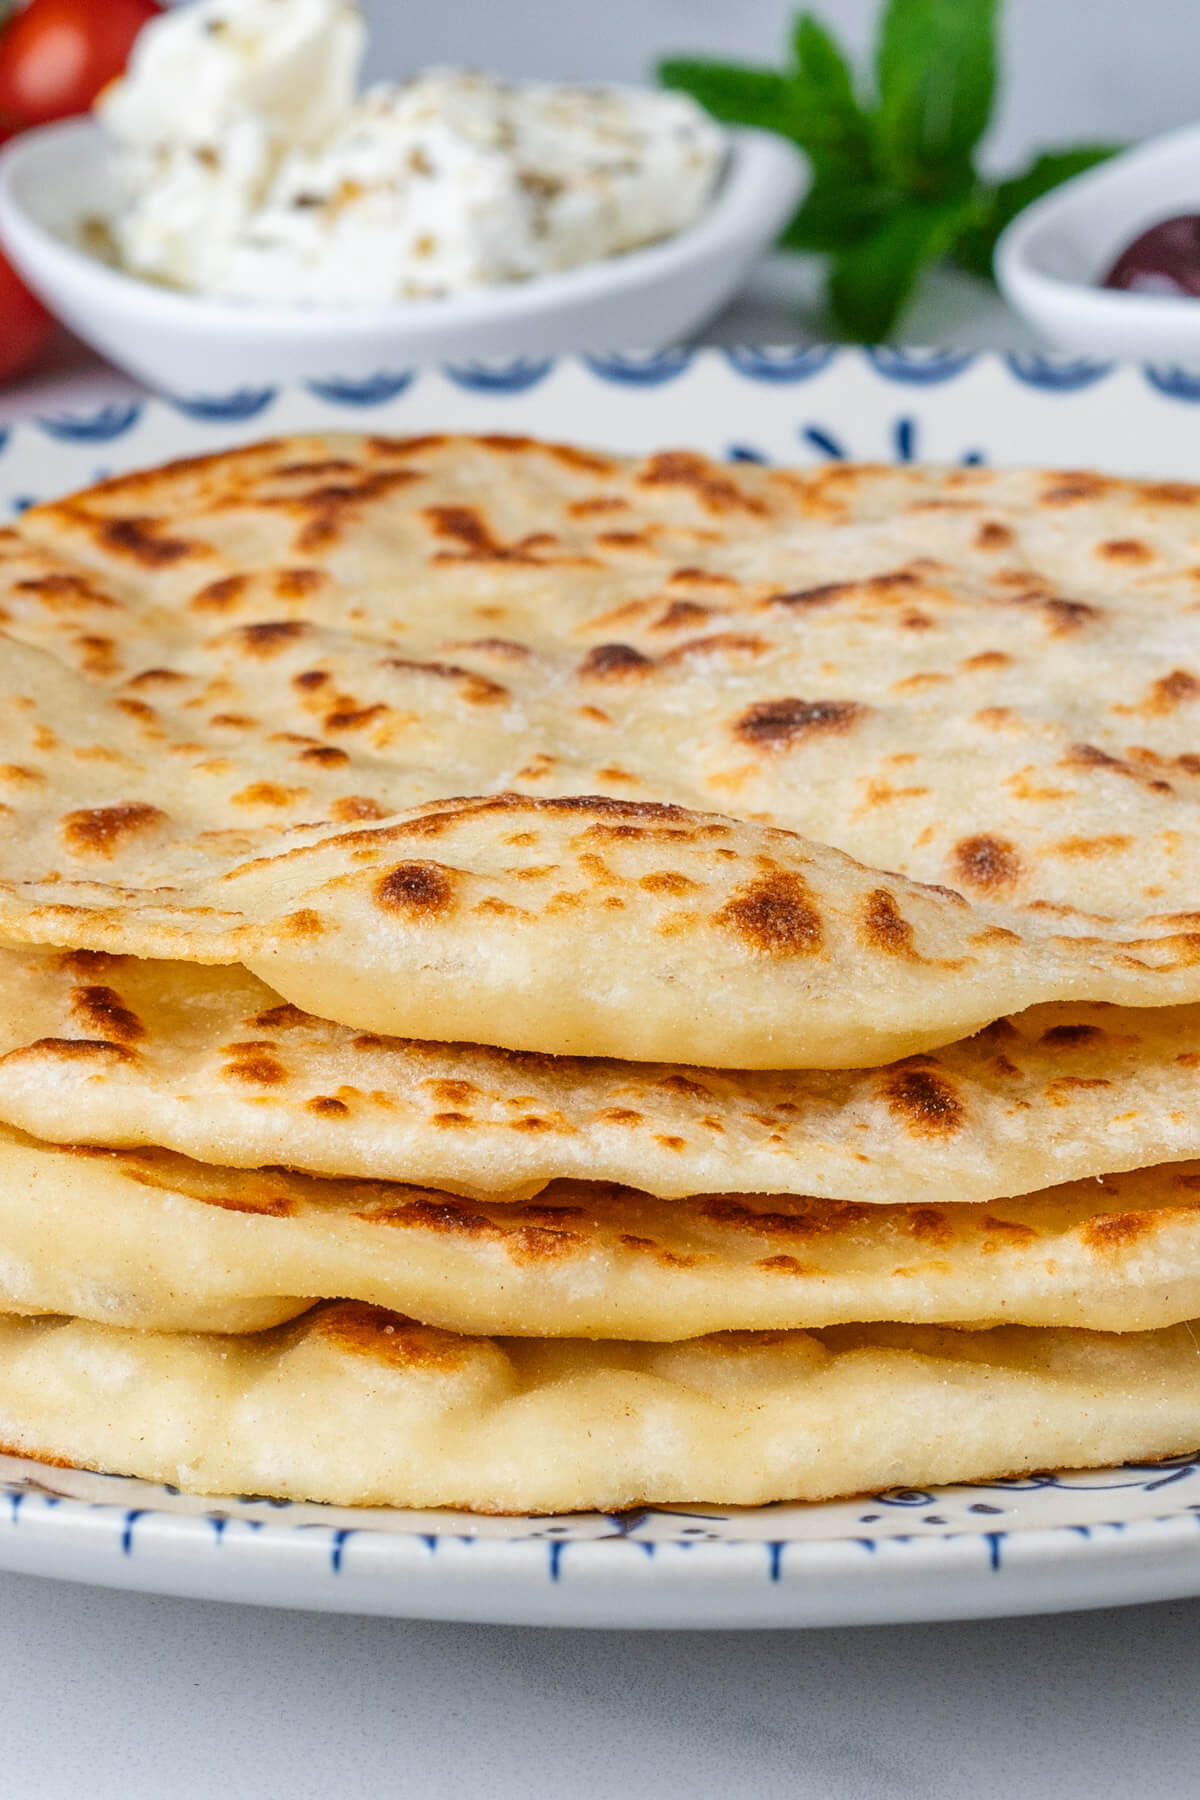 Stack of flatbread to show thickness